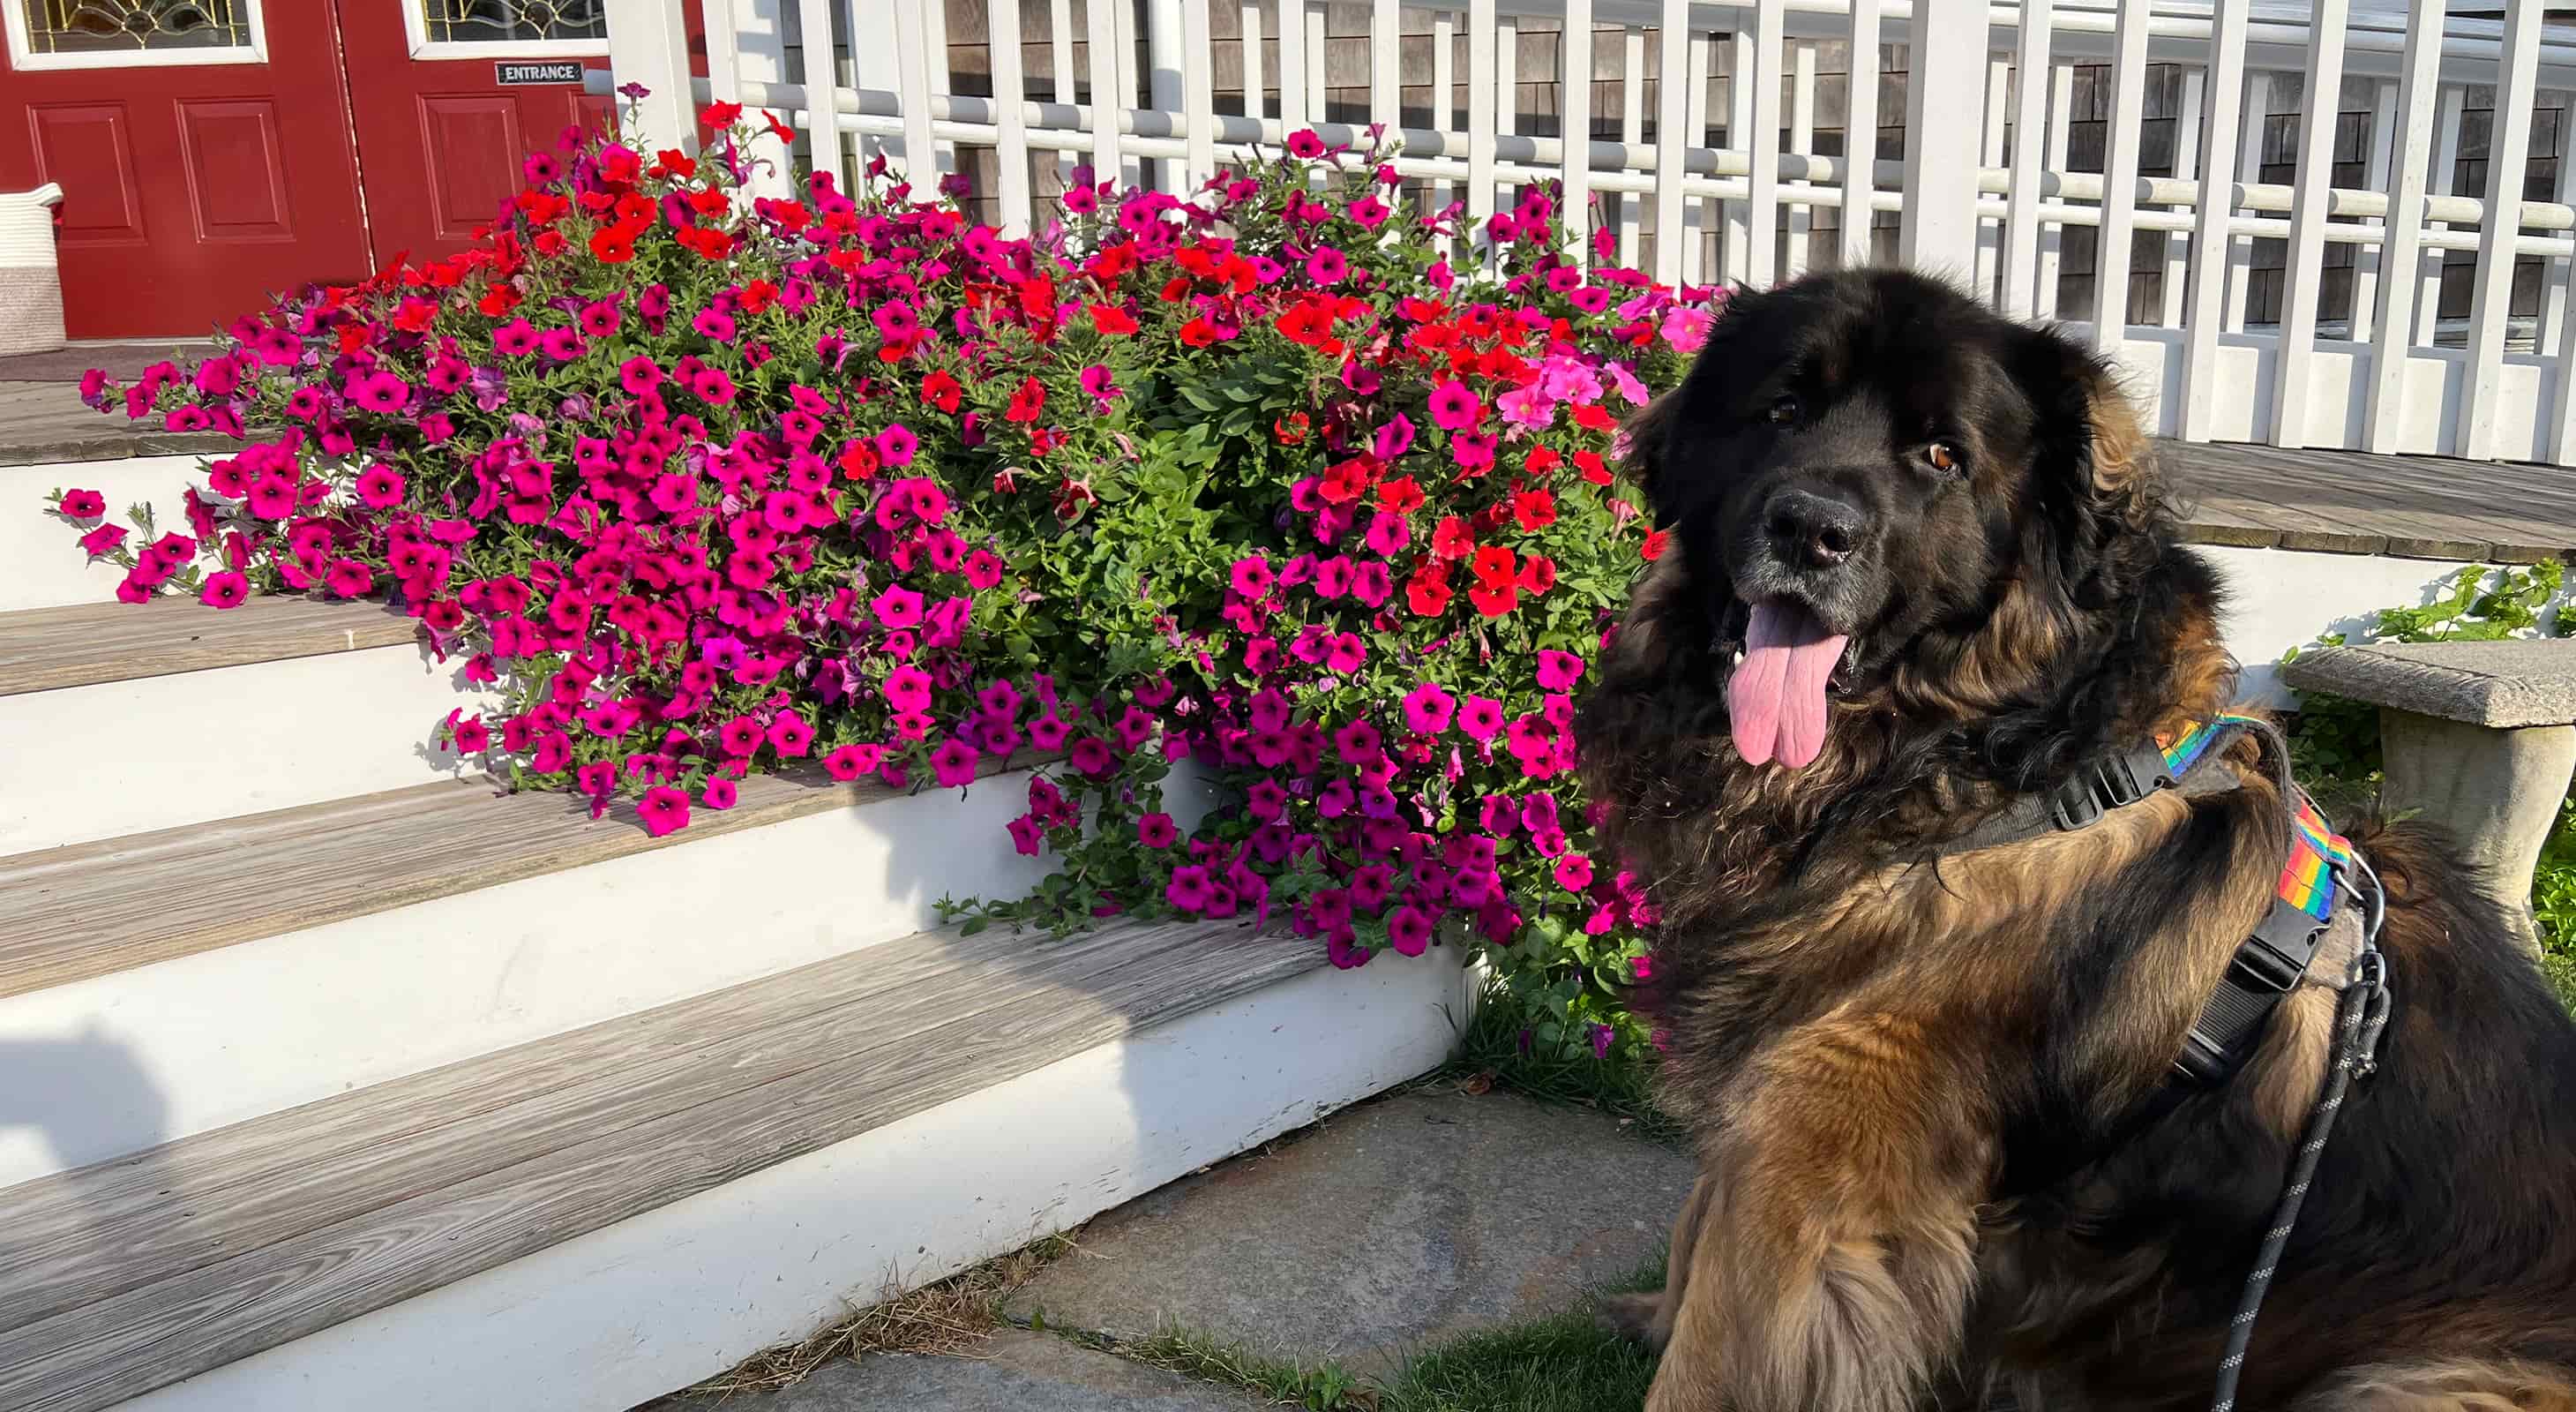 Brody the dog sitting next to blooming flowers